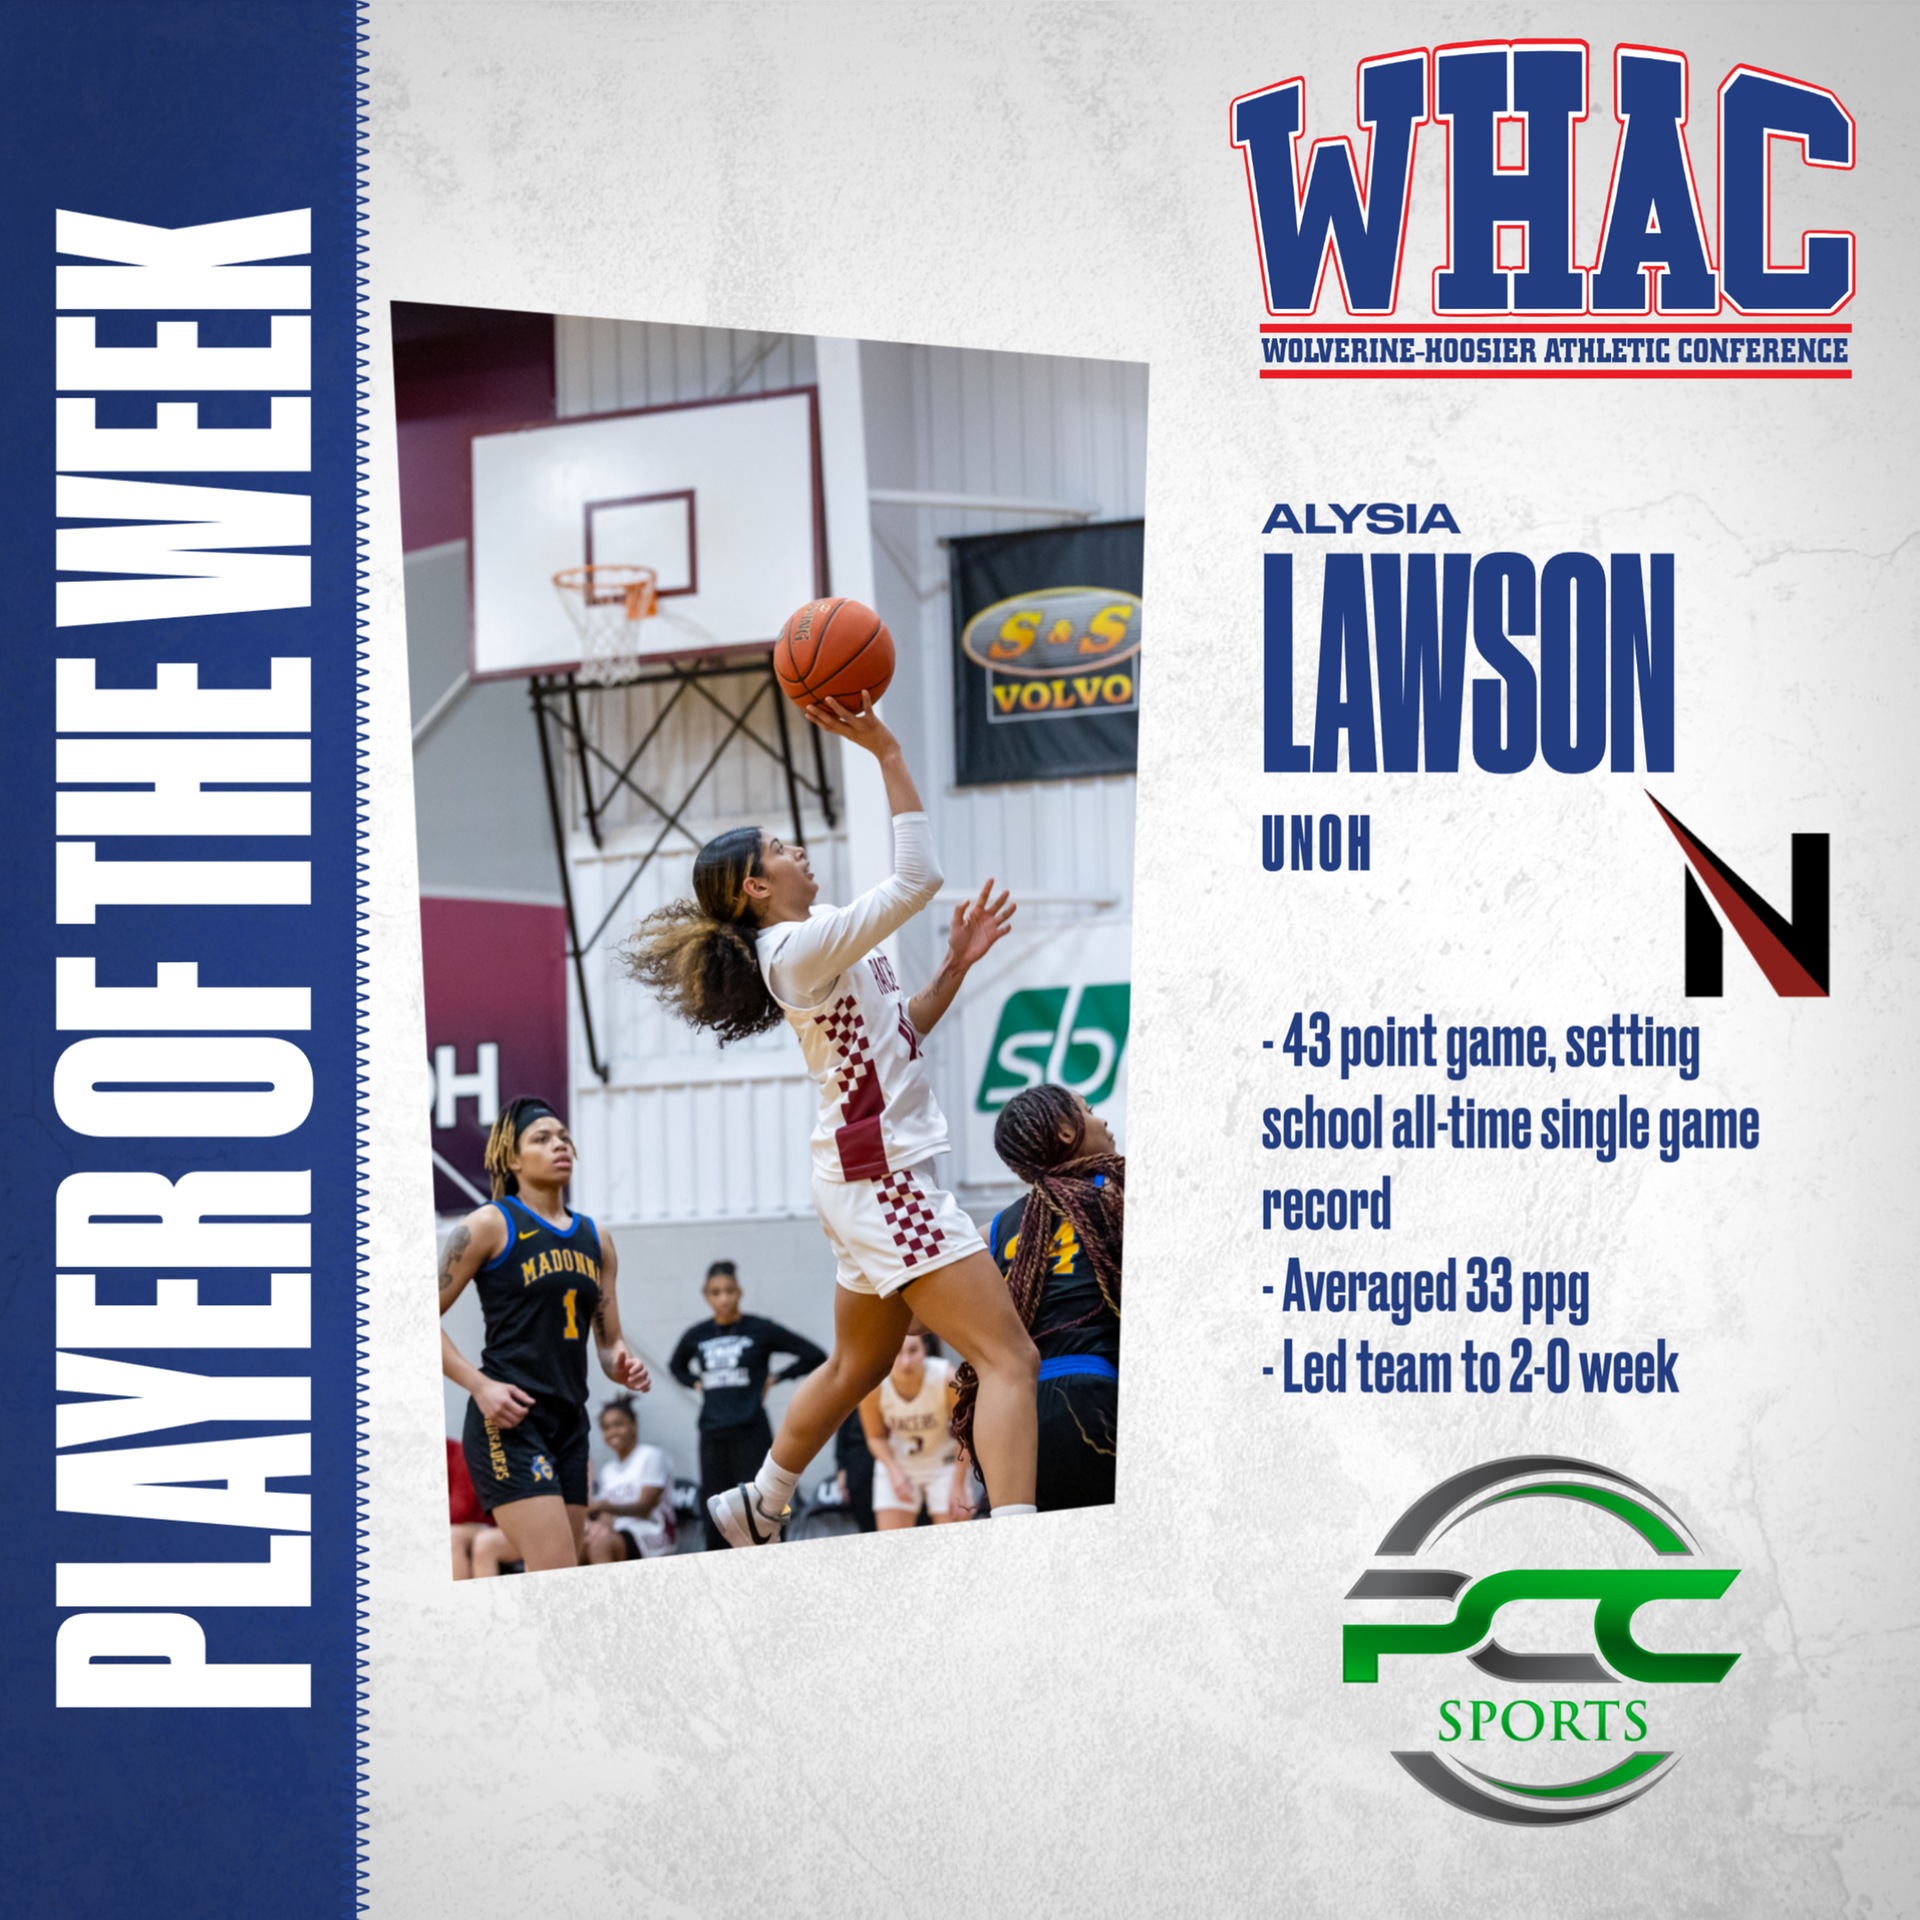 UNOH's Lawson Wins Player of the Week Honors